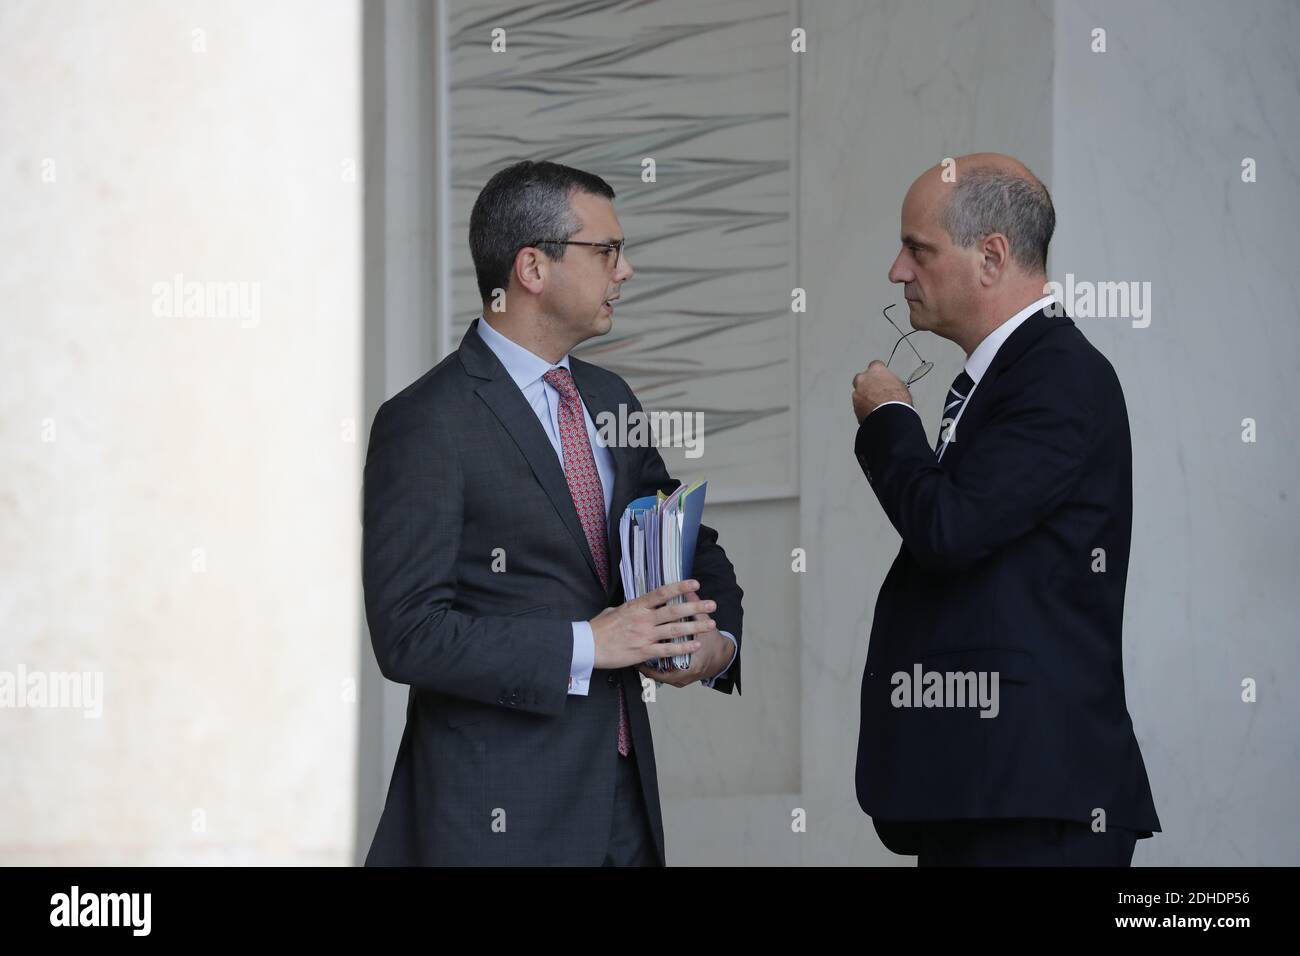 General-Secretary of the Presidency Alexis Kohler and Minister of National  Education Jean-Michel Blanquer leaving the weekly Cabinet meeting in Palais  de l'Elysee, Paris, France on October 25th, 2017. Photo by Henri  Szwarc/ABACAPRESS.COM